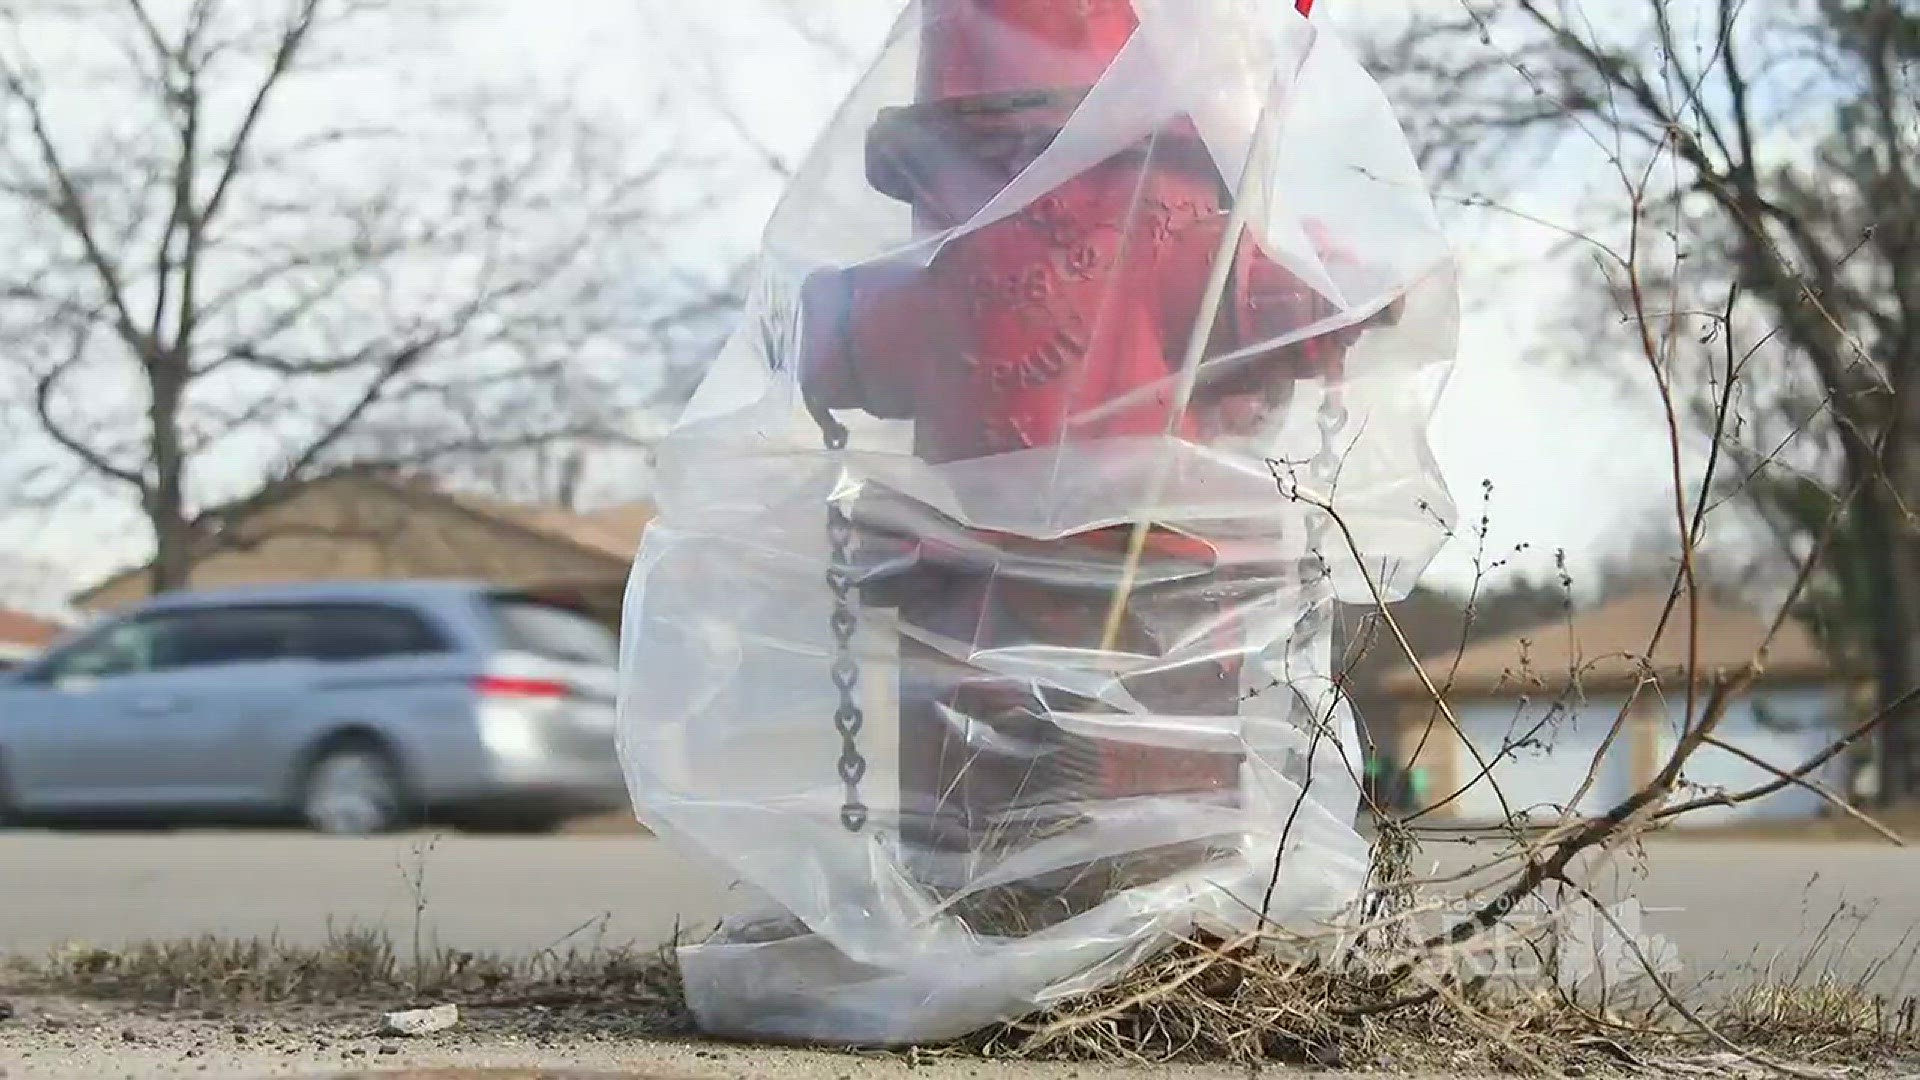 ask KARE: Why are all the fire hydrants in Edina covered in plastic?